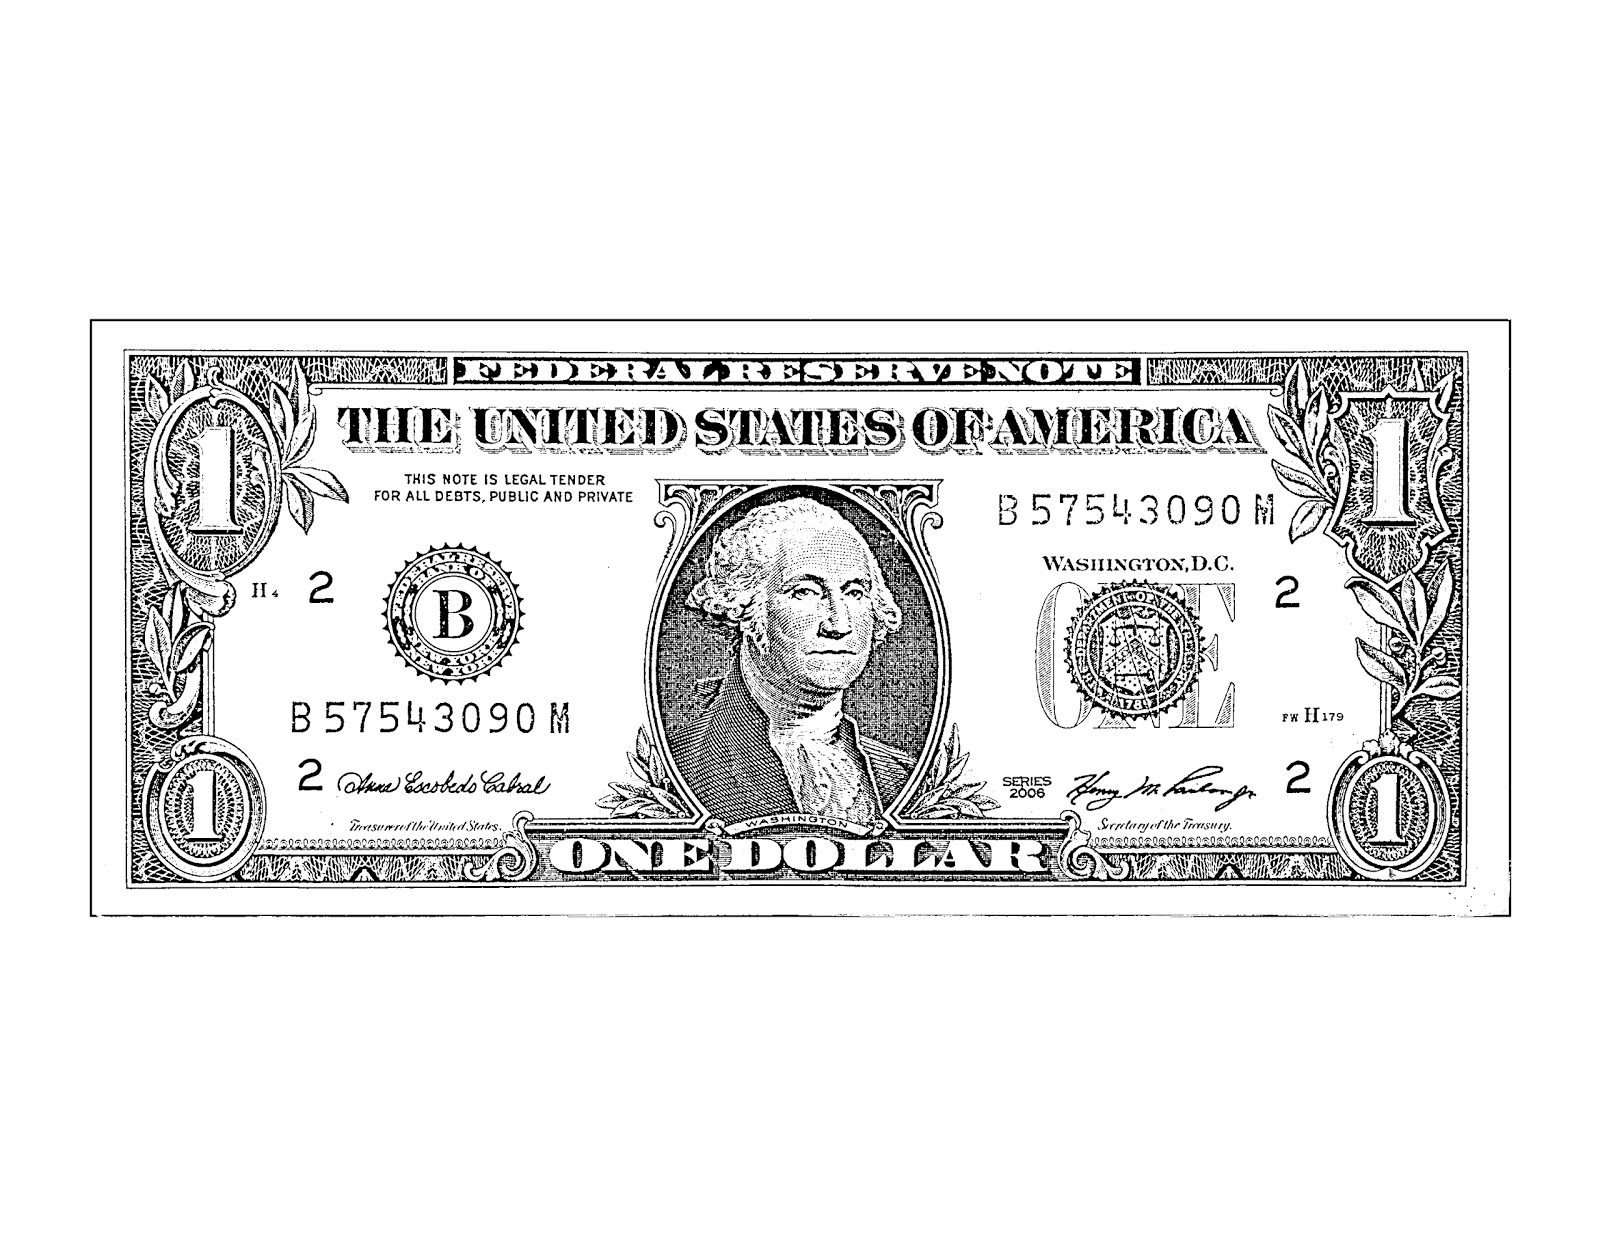 dollar clipart black and white